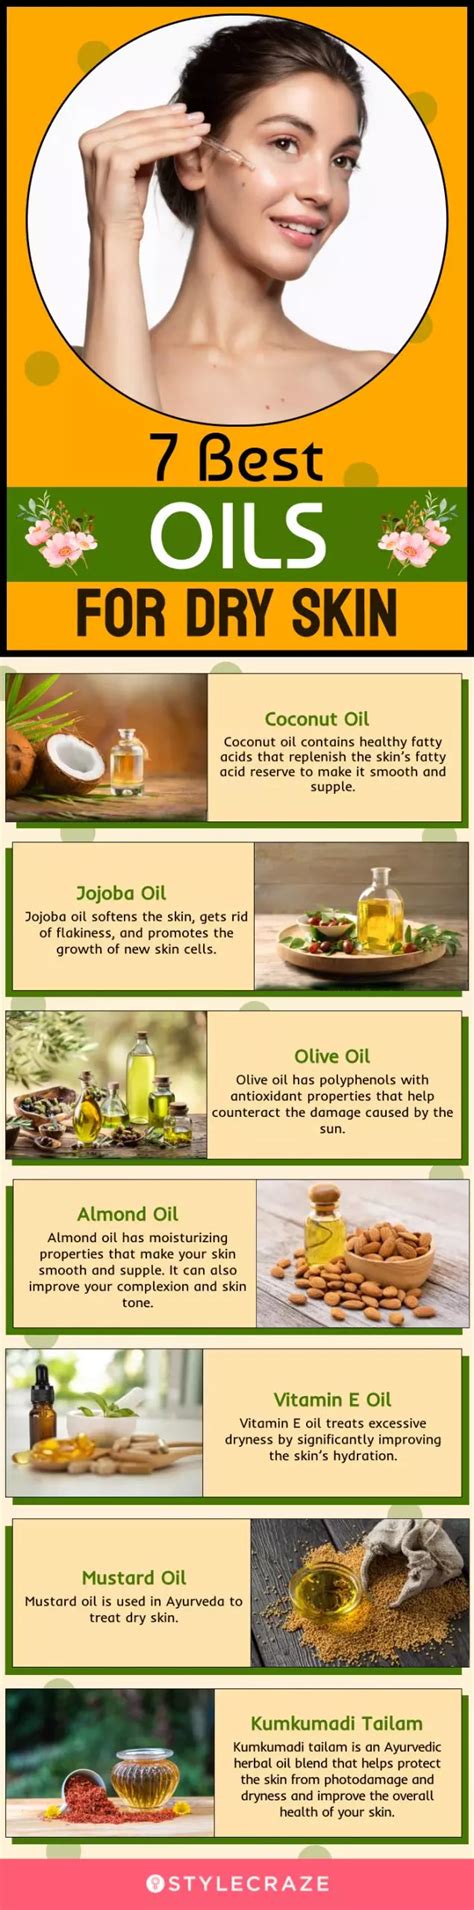 38 Home Remedies To Get Rid Of Dry Skin On The Face